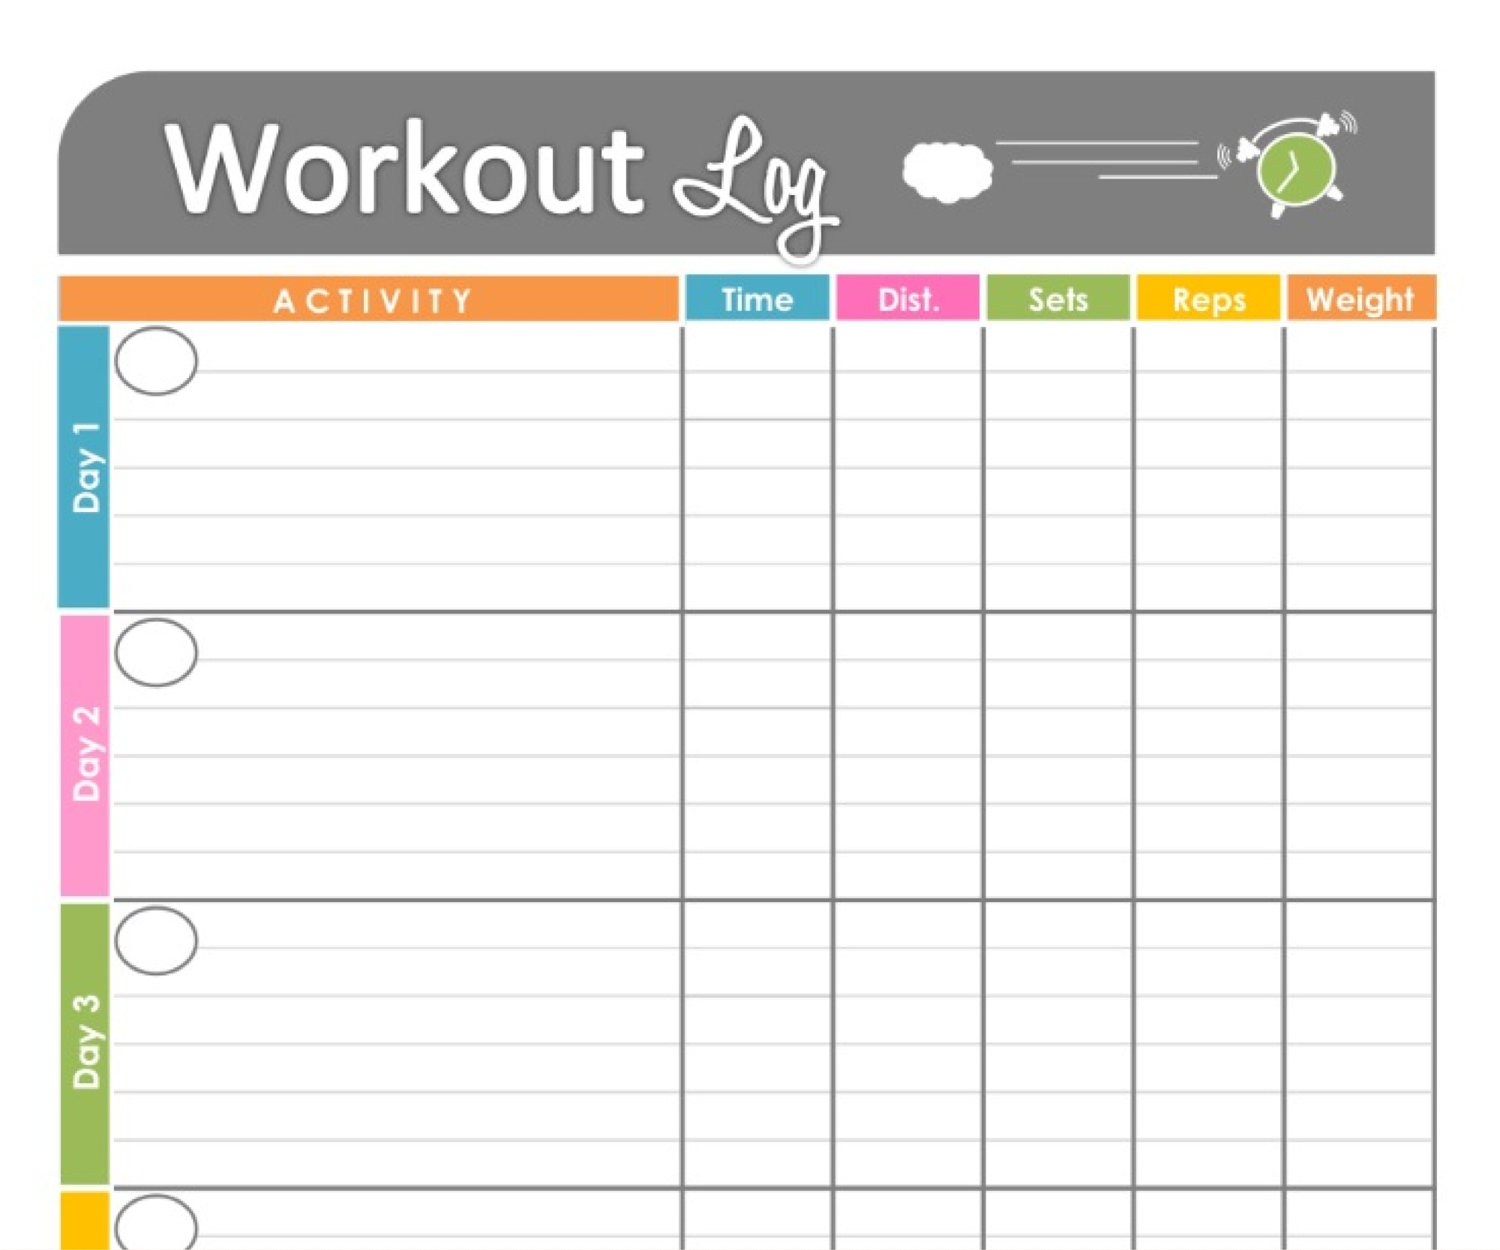 7-best-images-of-basic-workout-logs-printable-printable-exercise-log